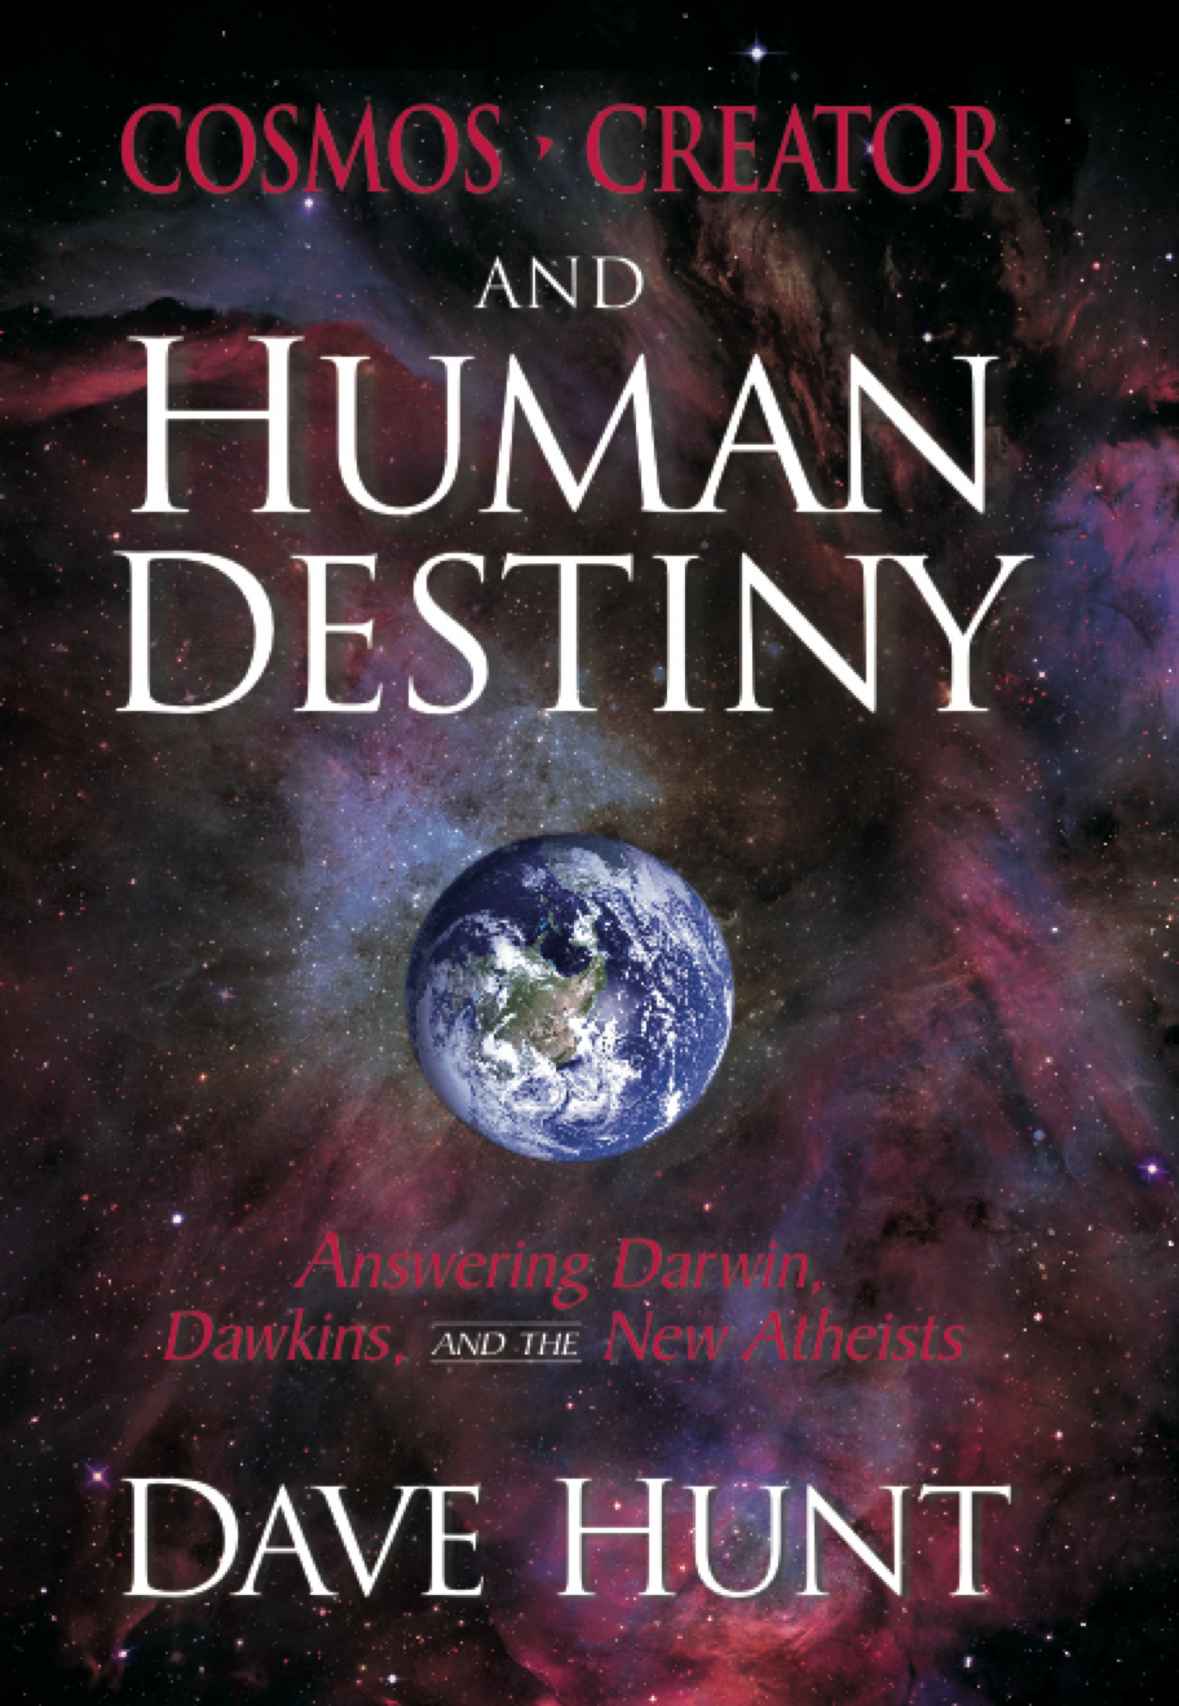 Cosmos, Creator and Human Destiny: Answering Darwin, Dawkins, and the New Atheists